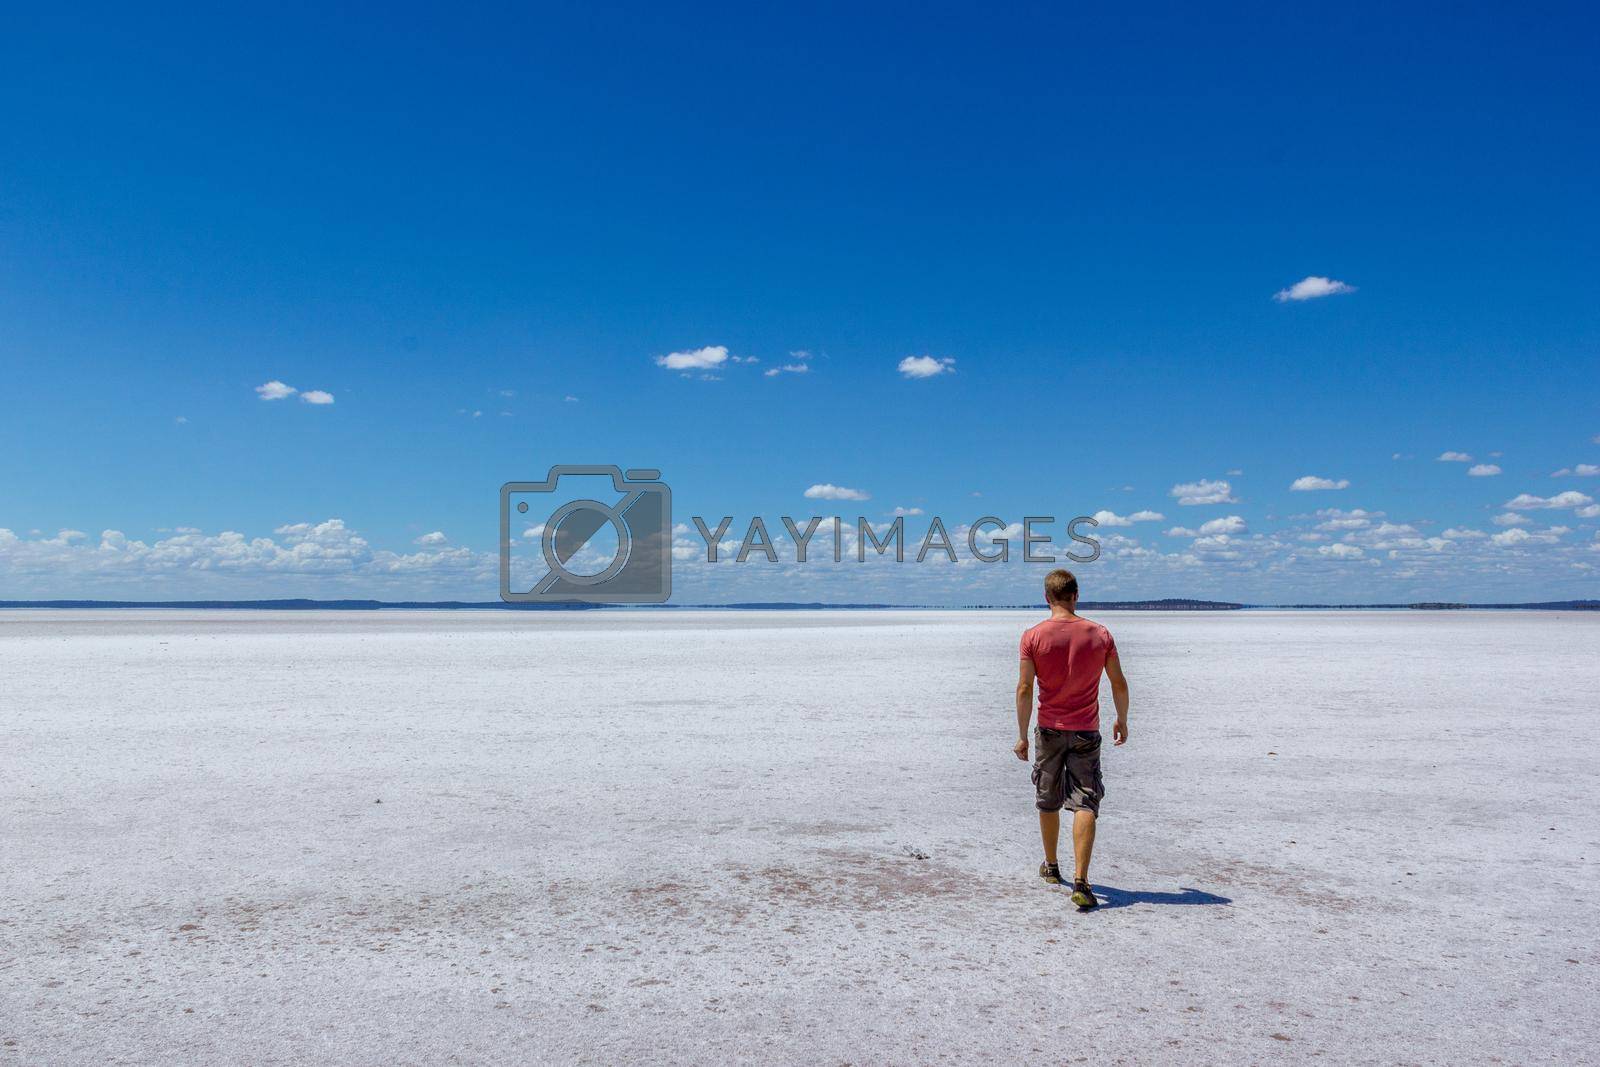 Royalty free image of time to relax for a man walking on a salt lake in western australia by bettercallcurry